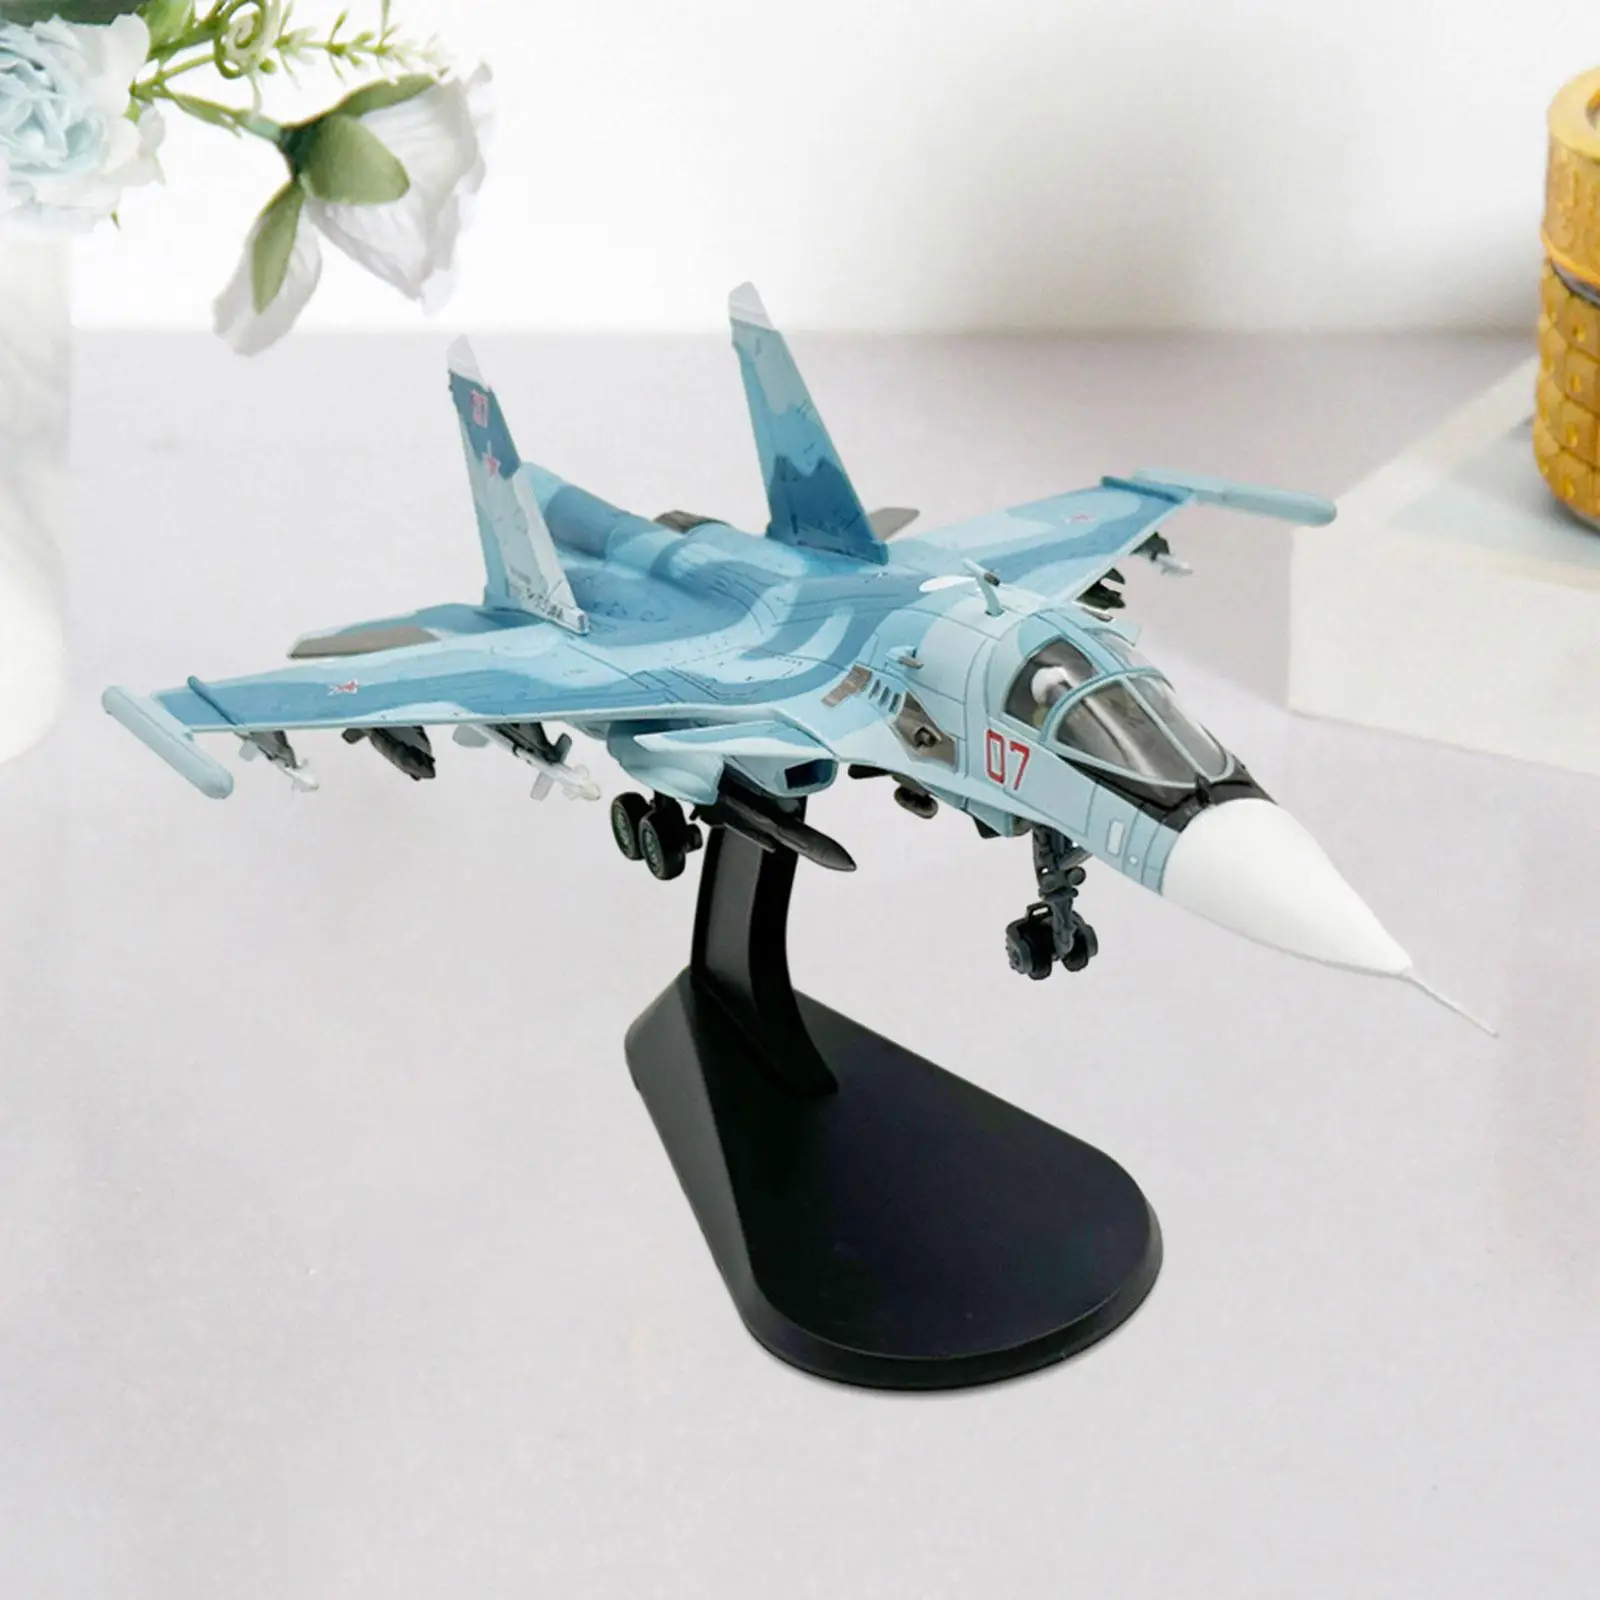 1/100 SU35 Diecast Plane Model Adults Gifts Miniature Aircraft for Home Living Room Desktop Household Aviation Commemorate